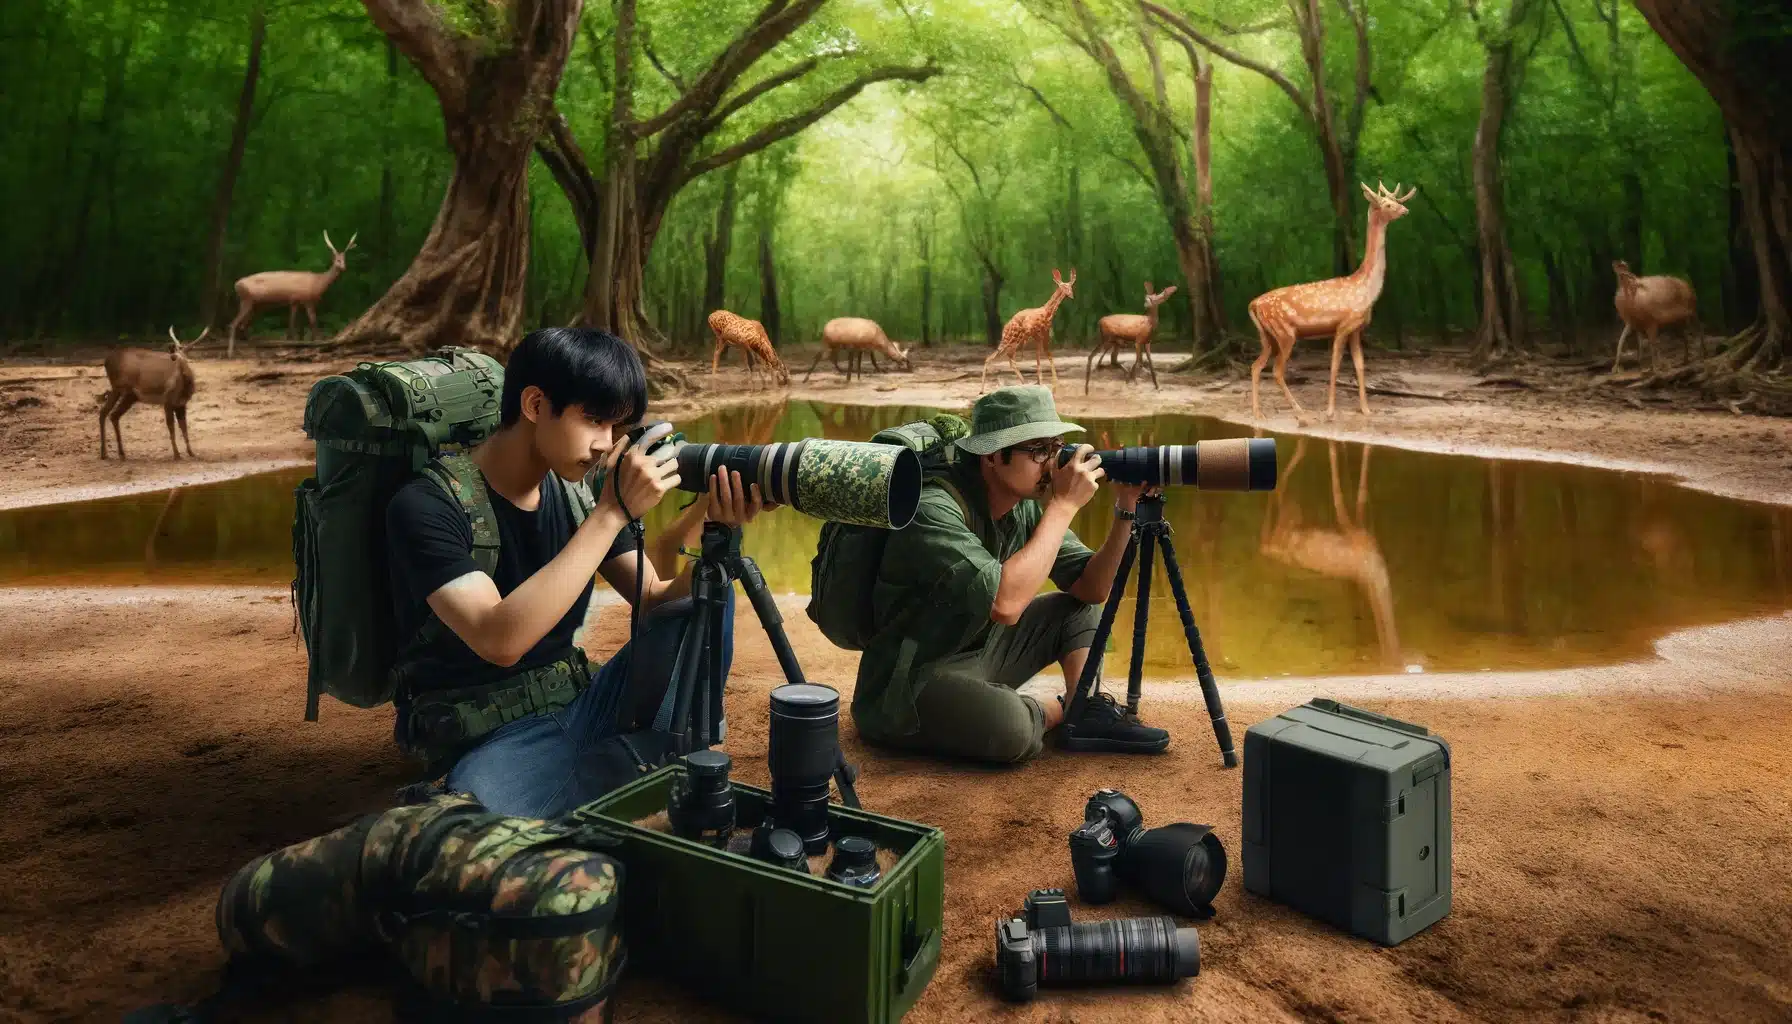 In a dense forest, a young Asian male and a middle-aged Hispanic female use advanced photography equipment near a watering hole, capturing wildlife such as deer and birds, showcasing effective wildlife photography tools and techniques.